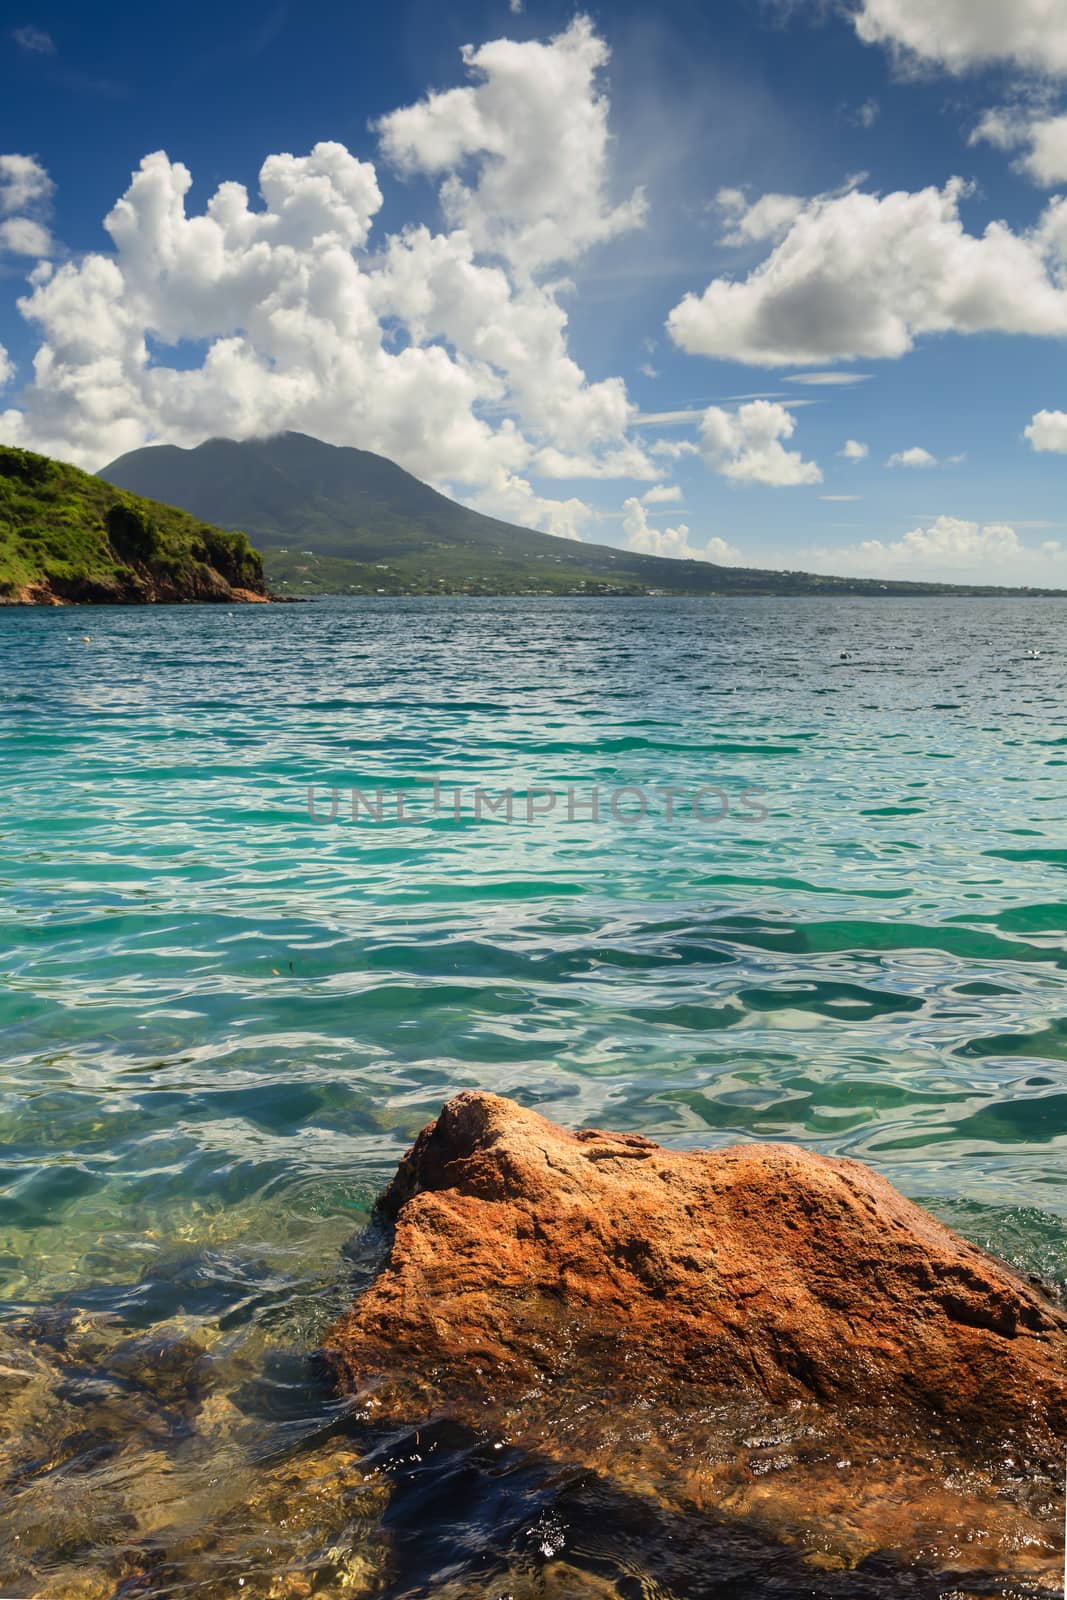 The view from Cockleshell Bay on the Caribbean island of St. Kitts in the West Indies.  The island of Nevis can be seen in the background.